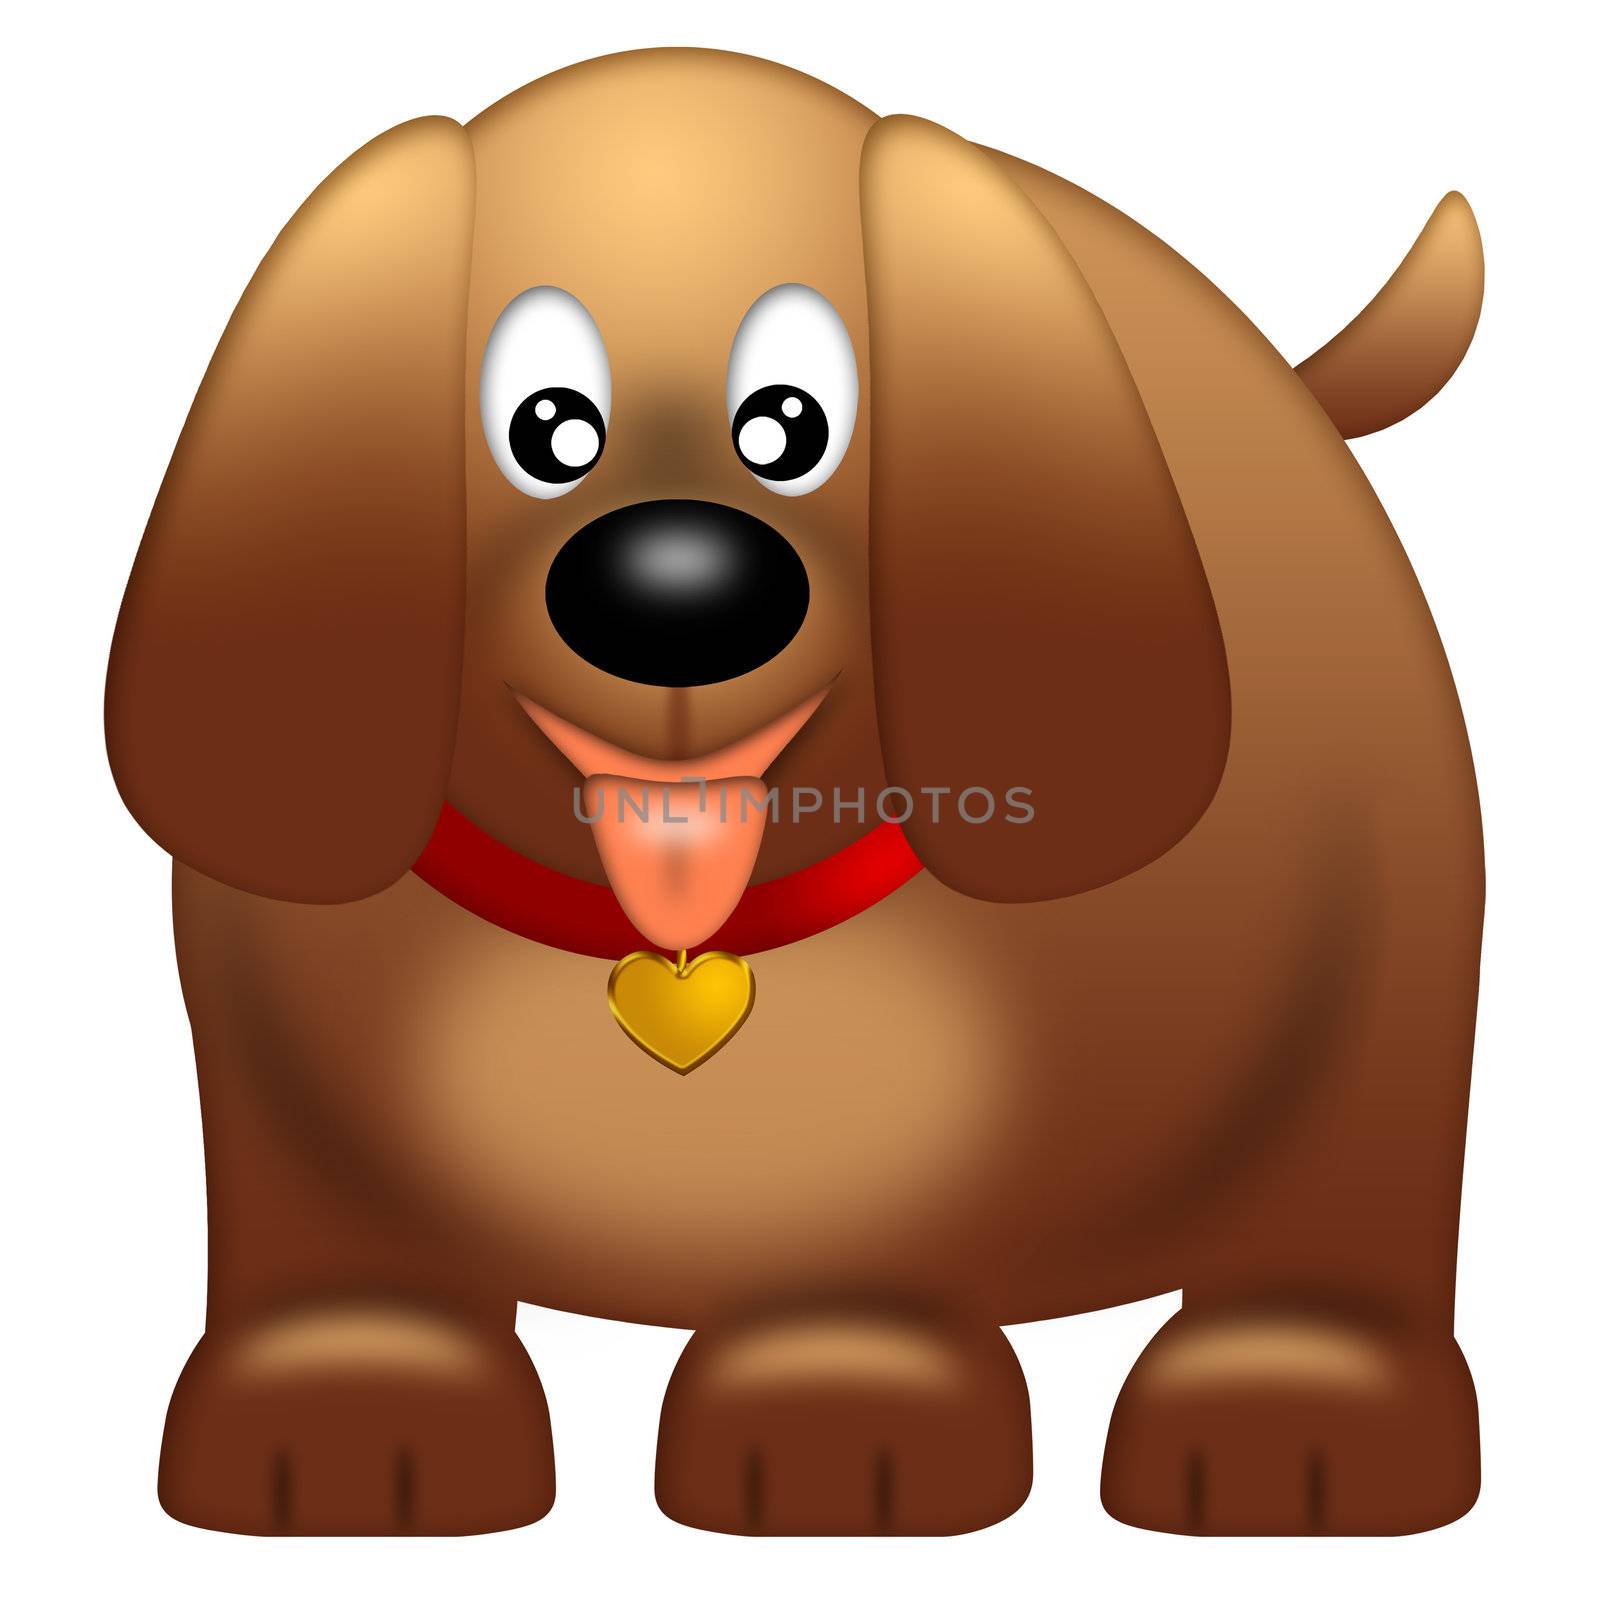 Cute Puppy Dog with Red Collar by jpldesigns